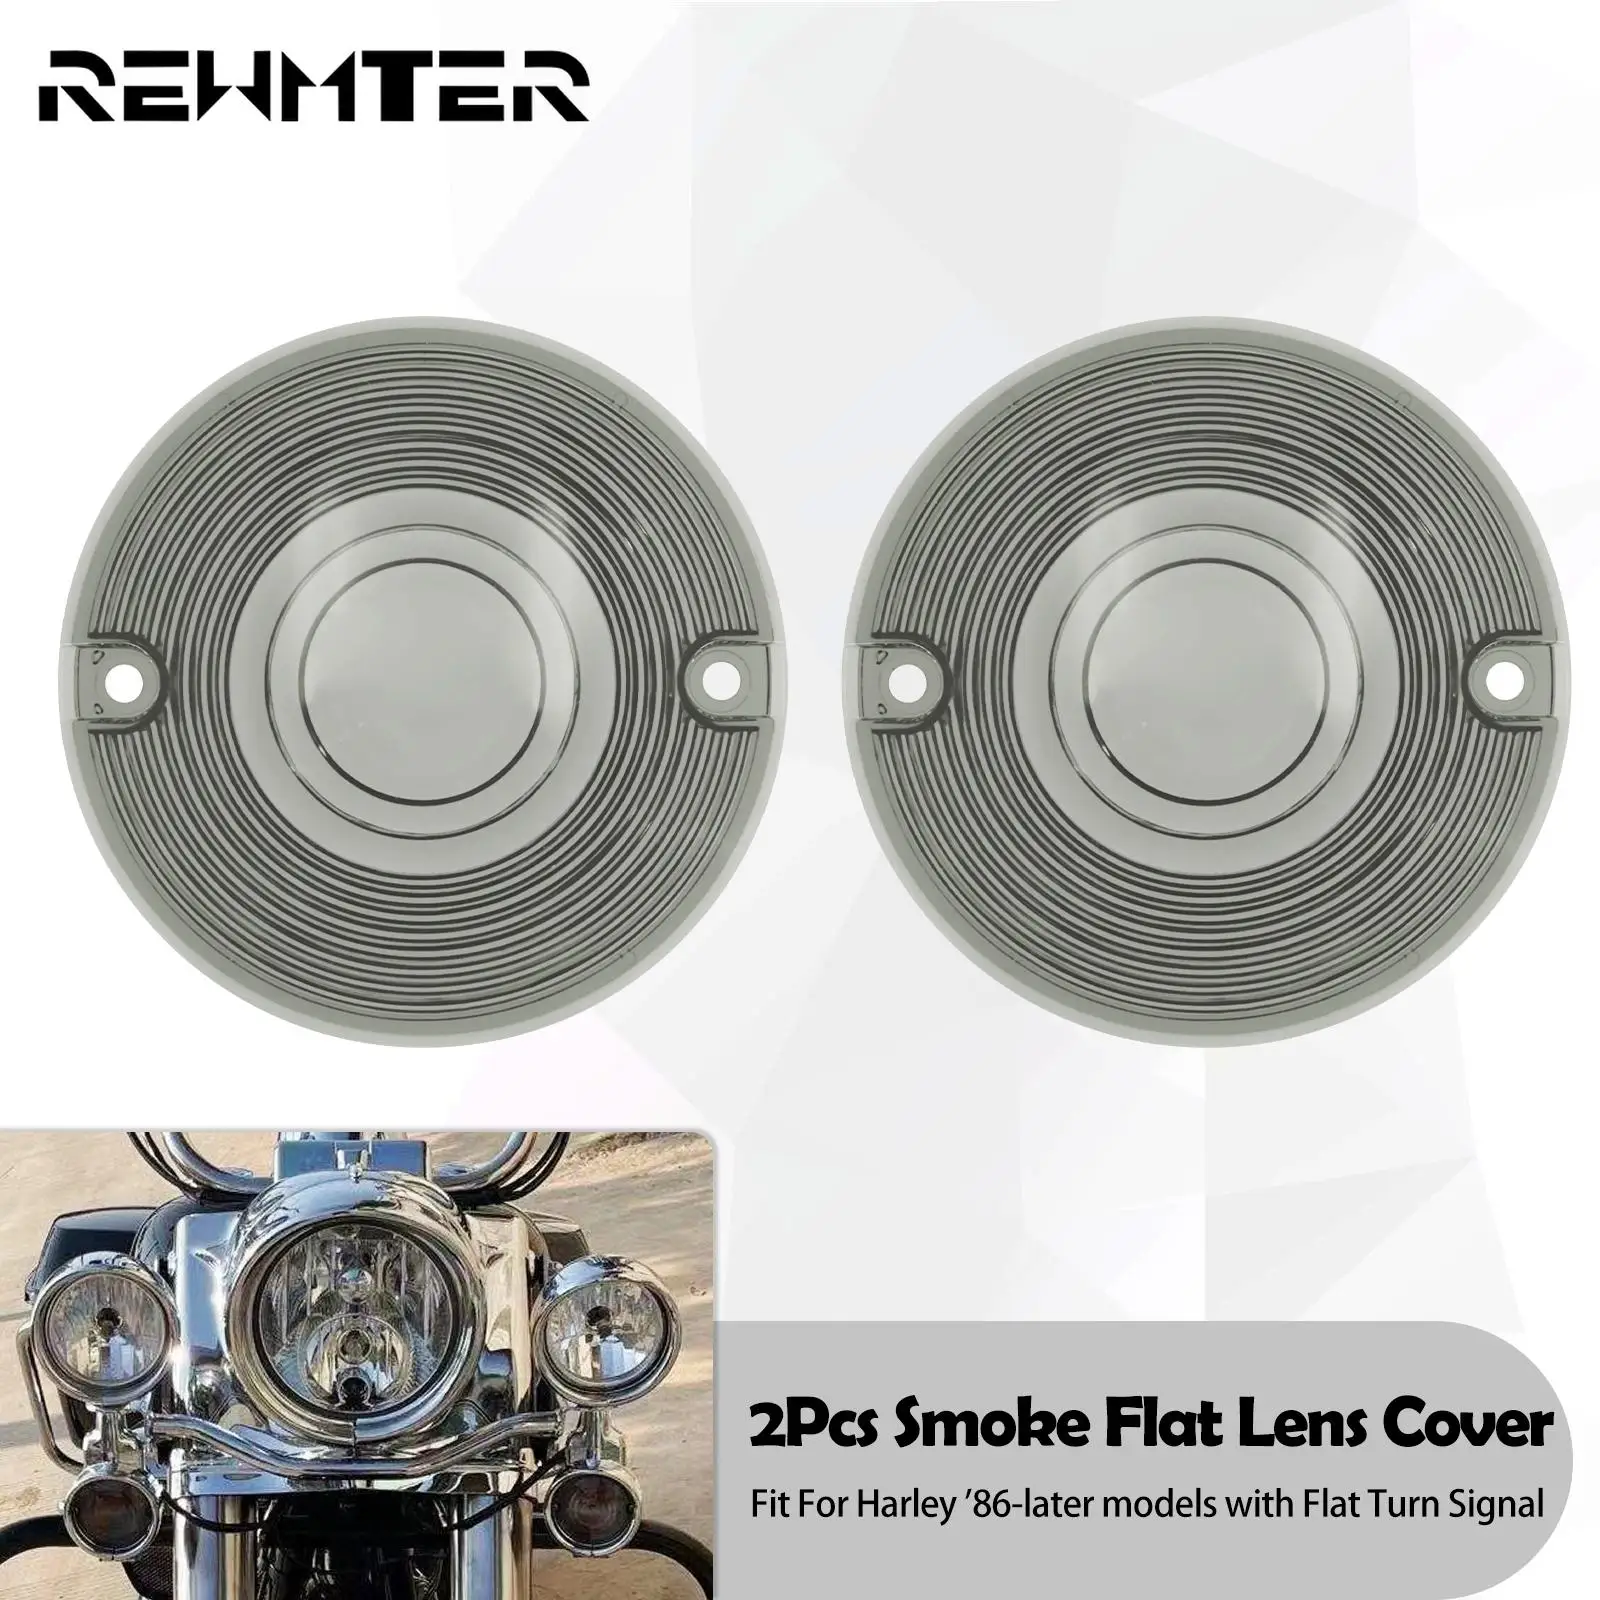 

2xMotorcycle Smoke Turn Light Signal Lens Cover ABS For Harley Softail Touring Road King Street Electra Glide FLHR 1986-Later